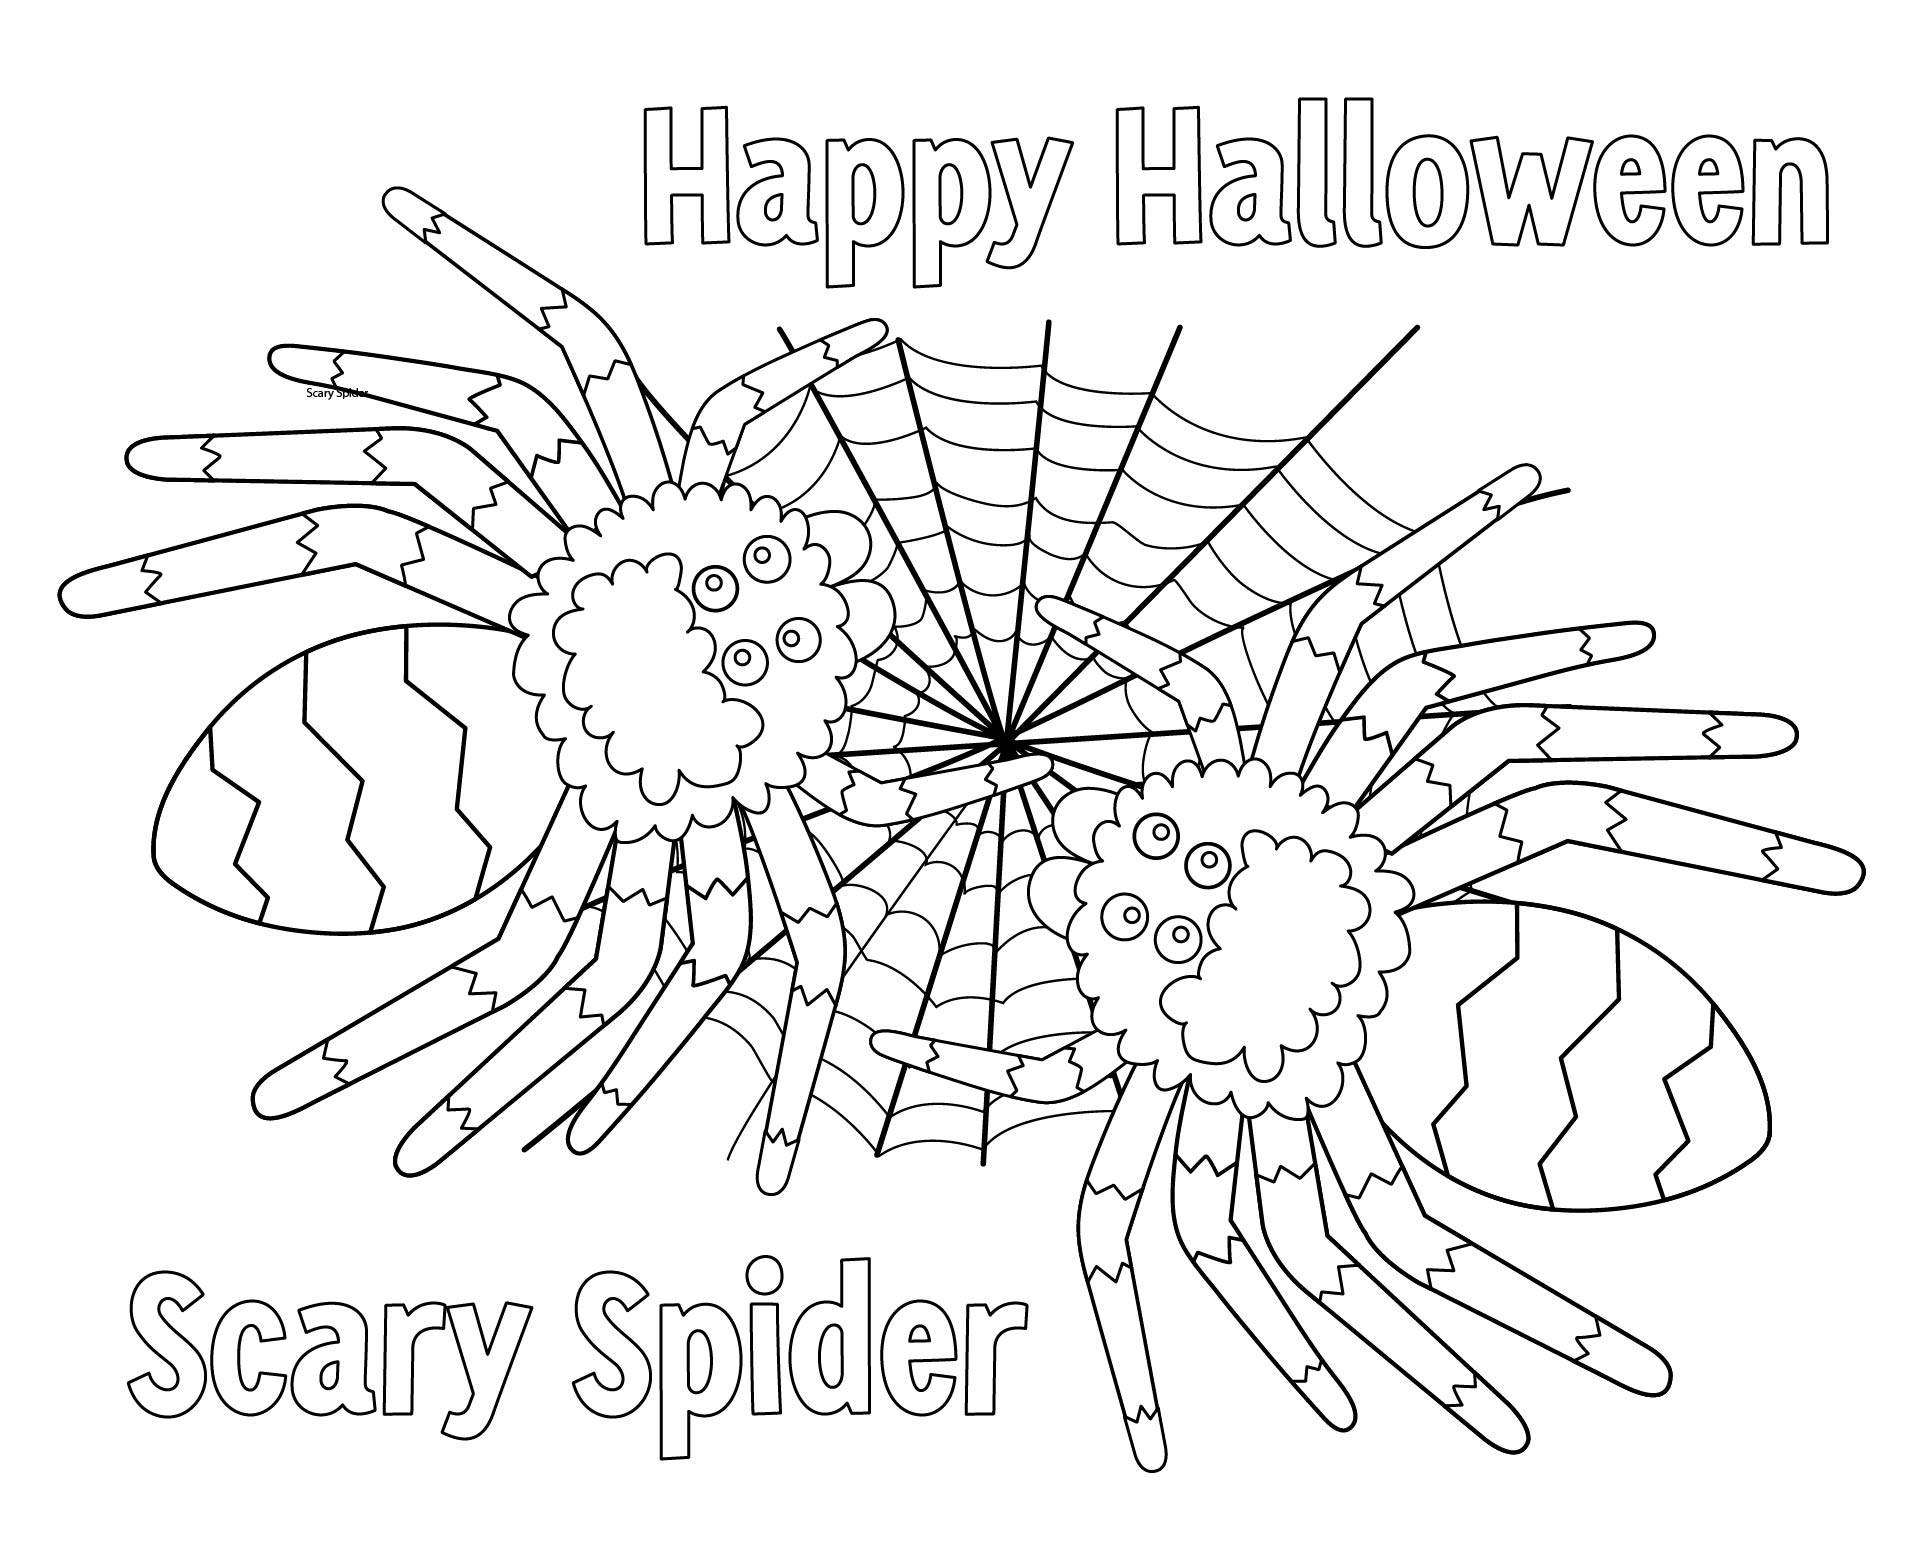 Scary Spider Coloring Page Halloween Printable